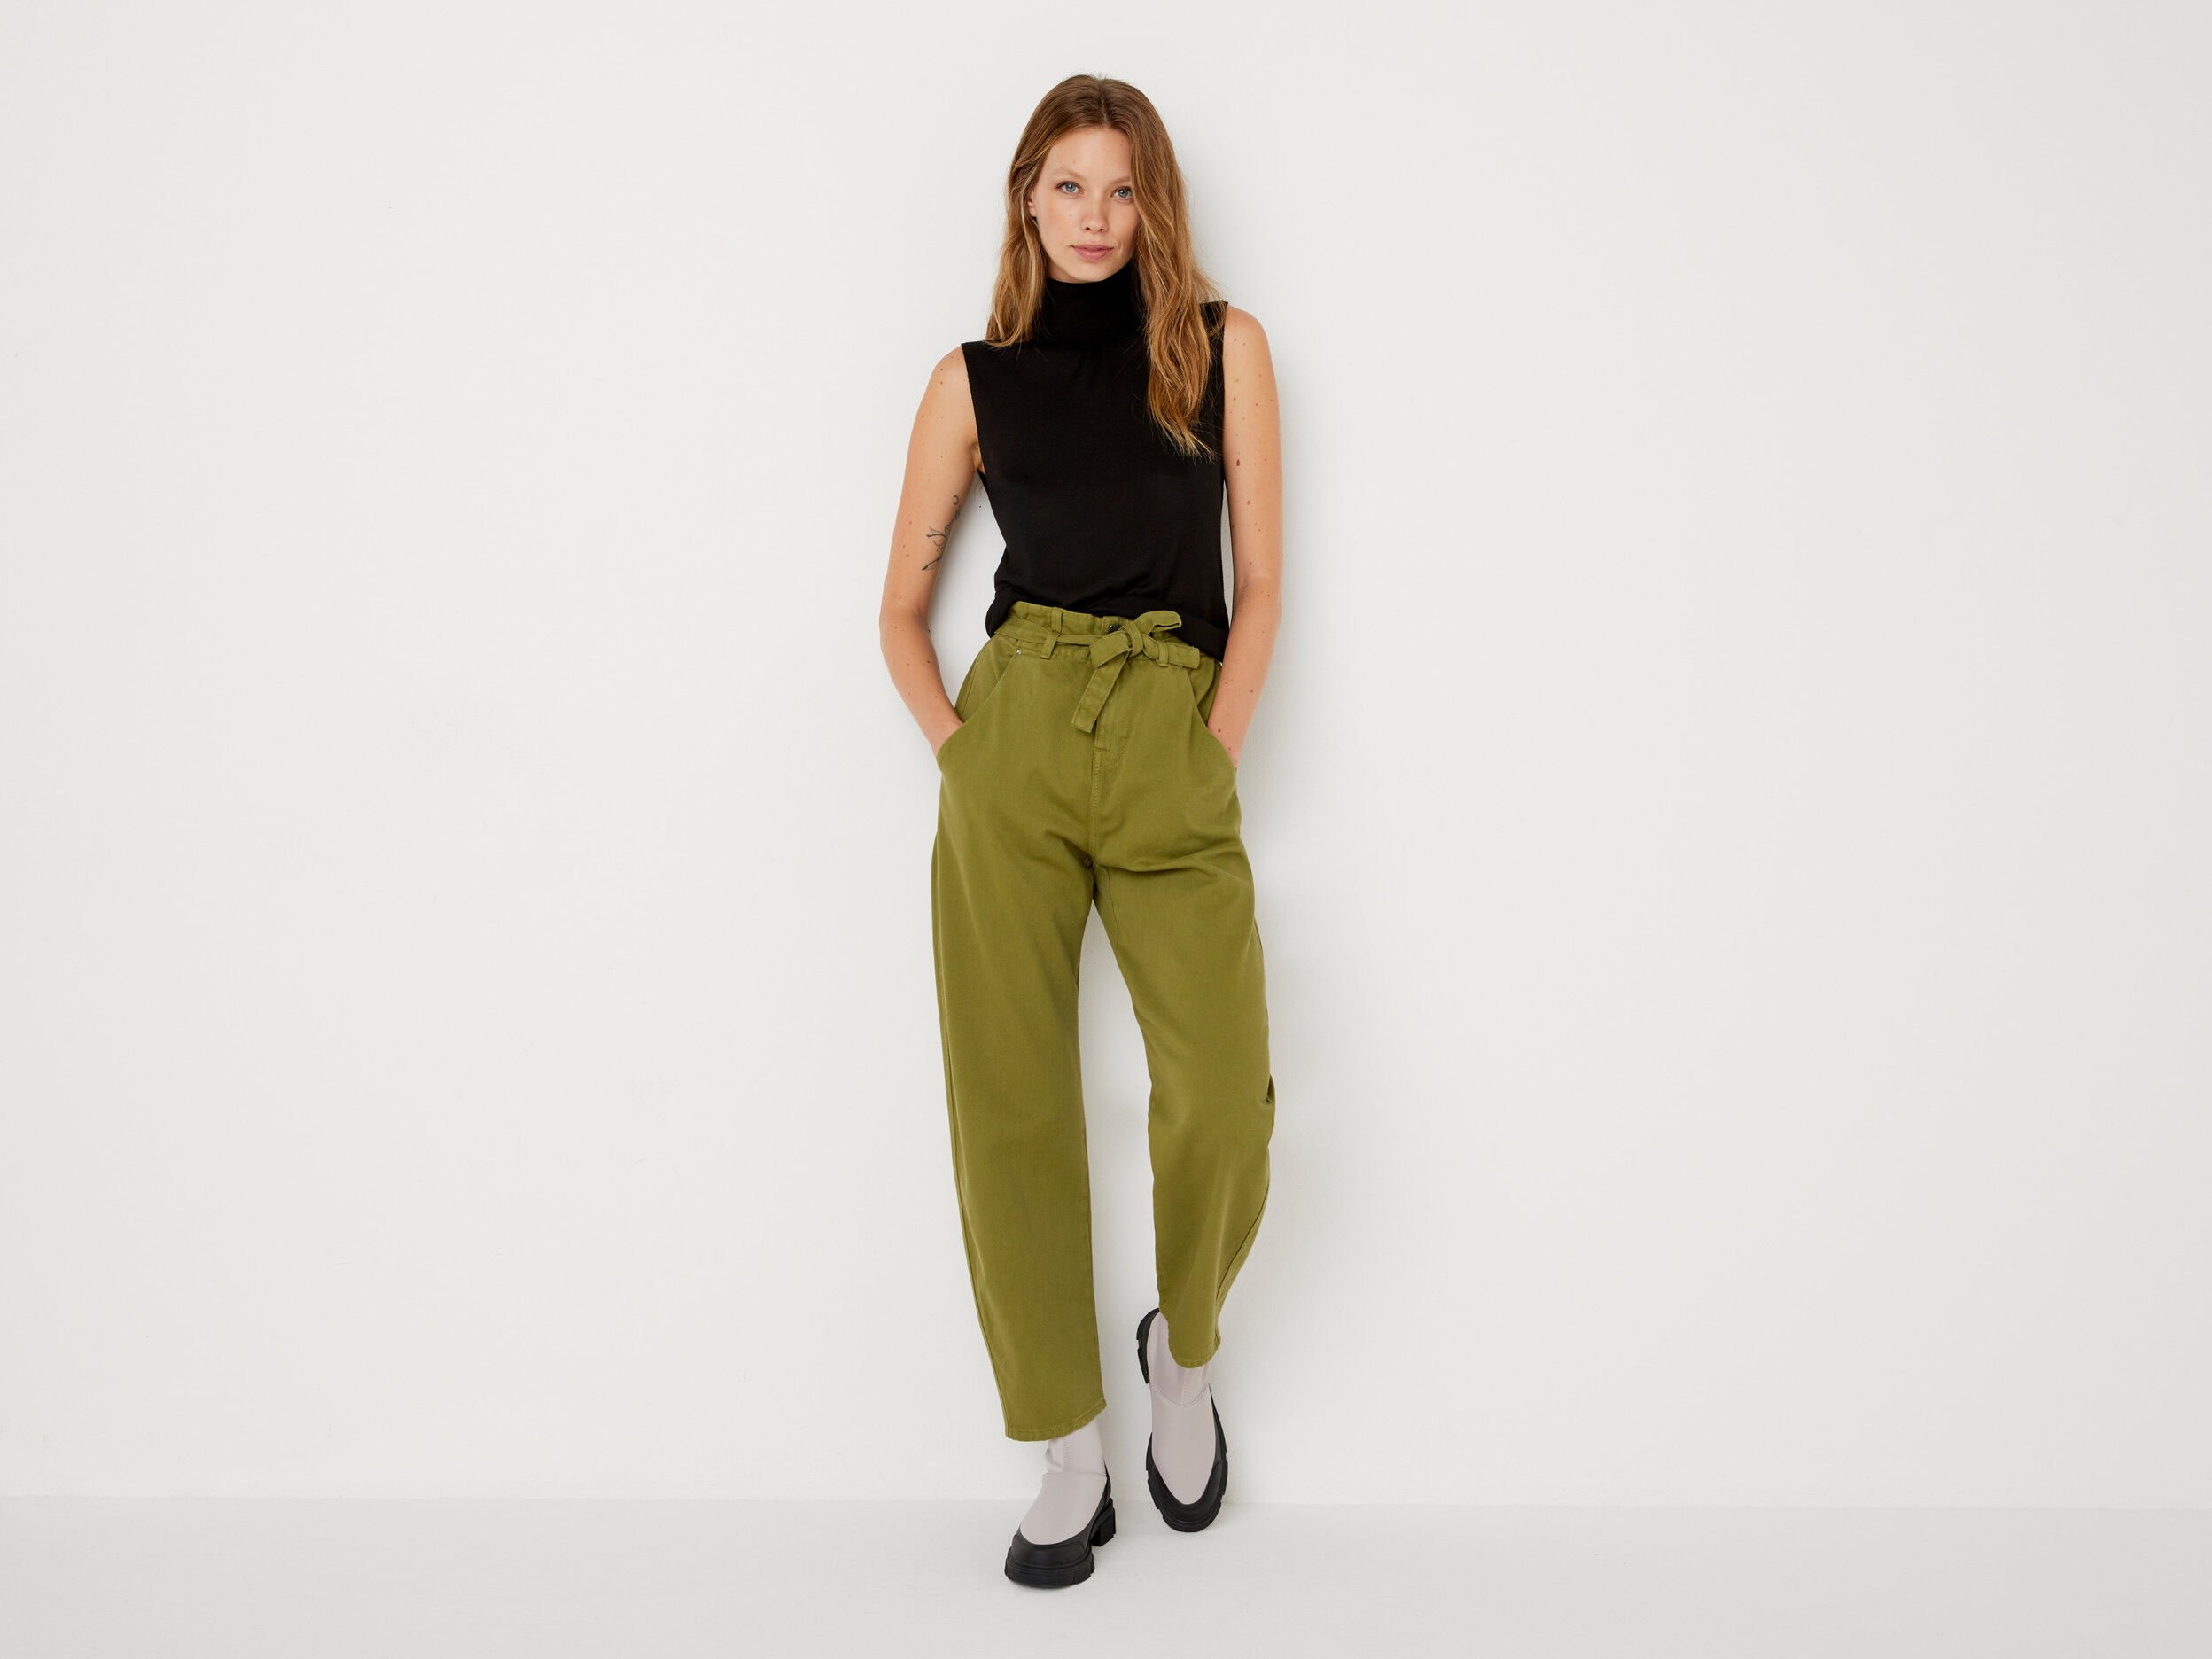 How to Wear Paperbag Waist Pants: Fit & Styling Tips